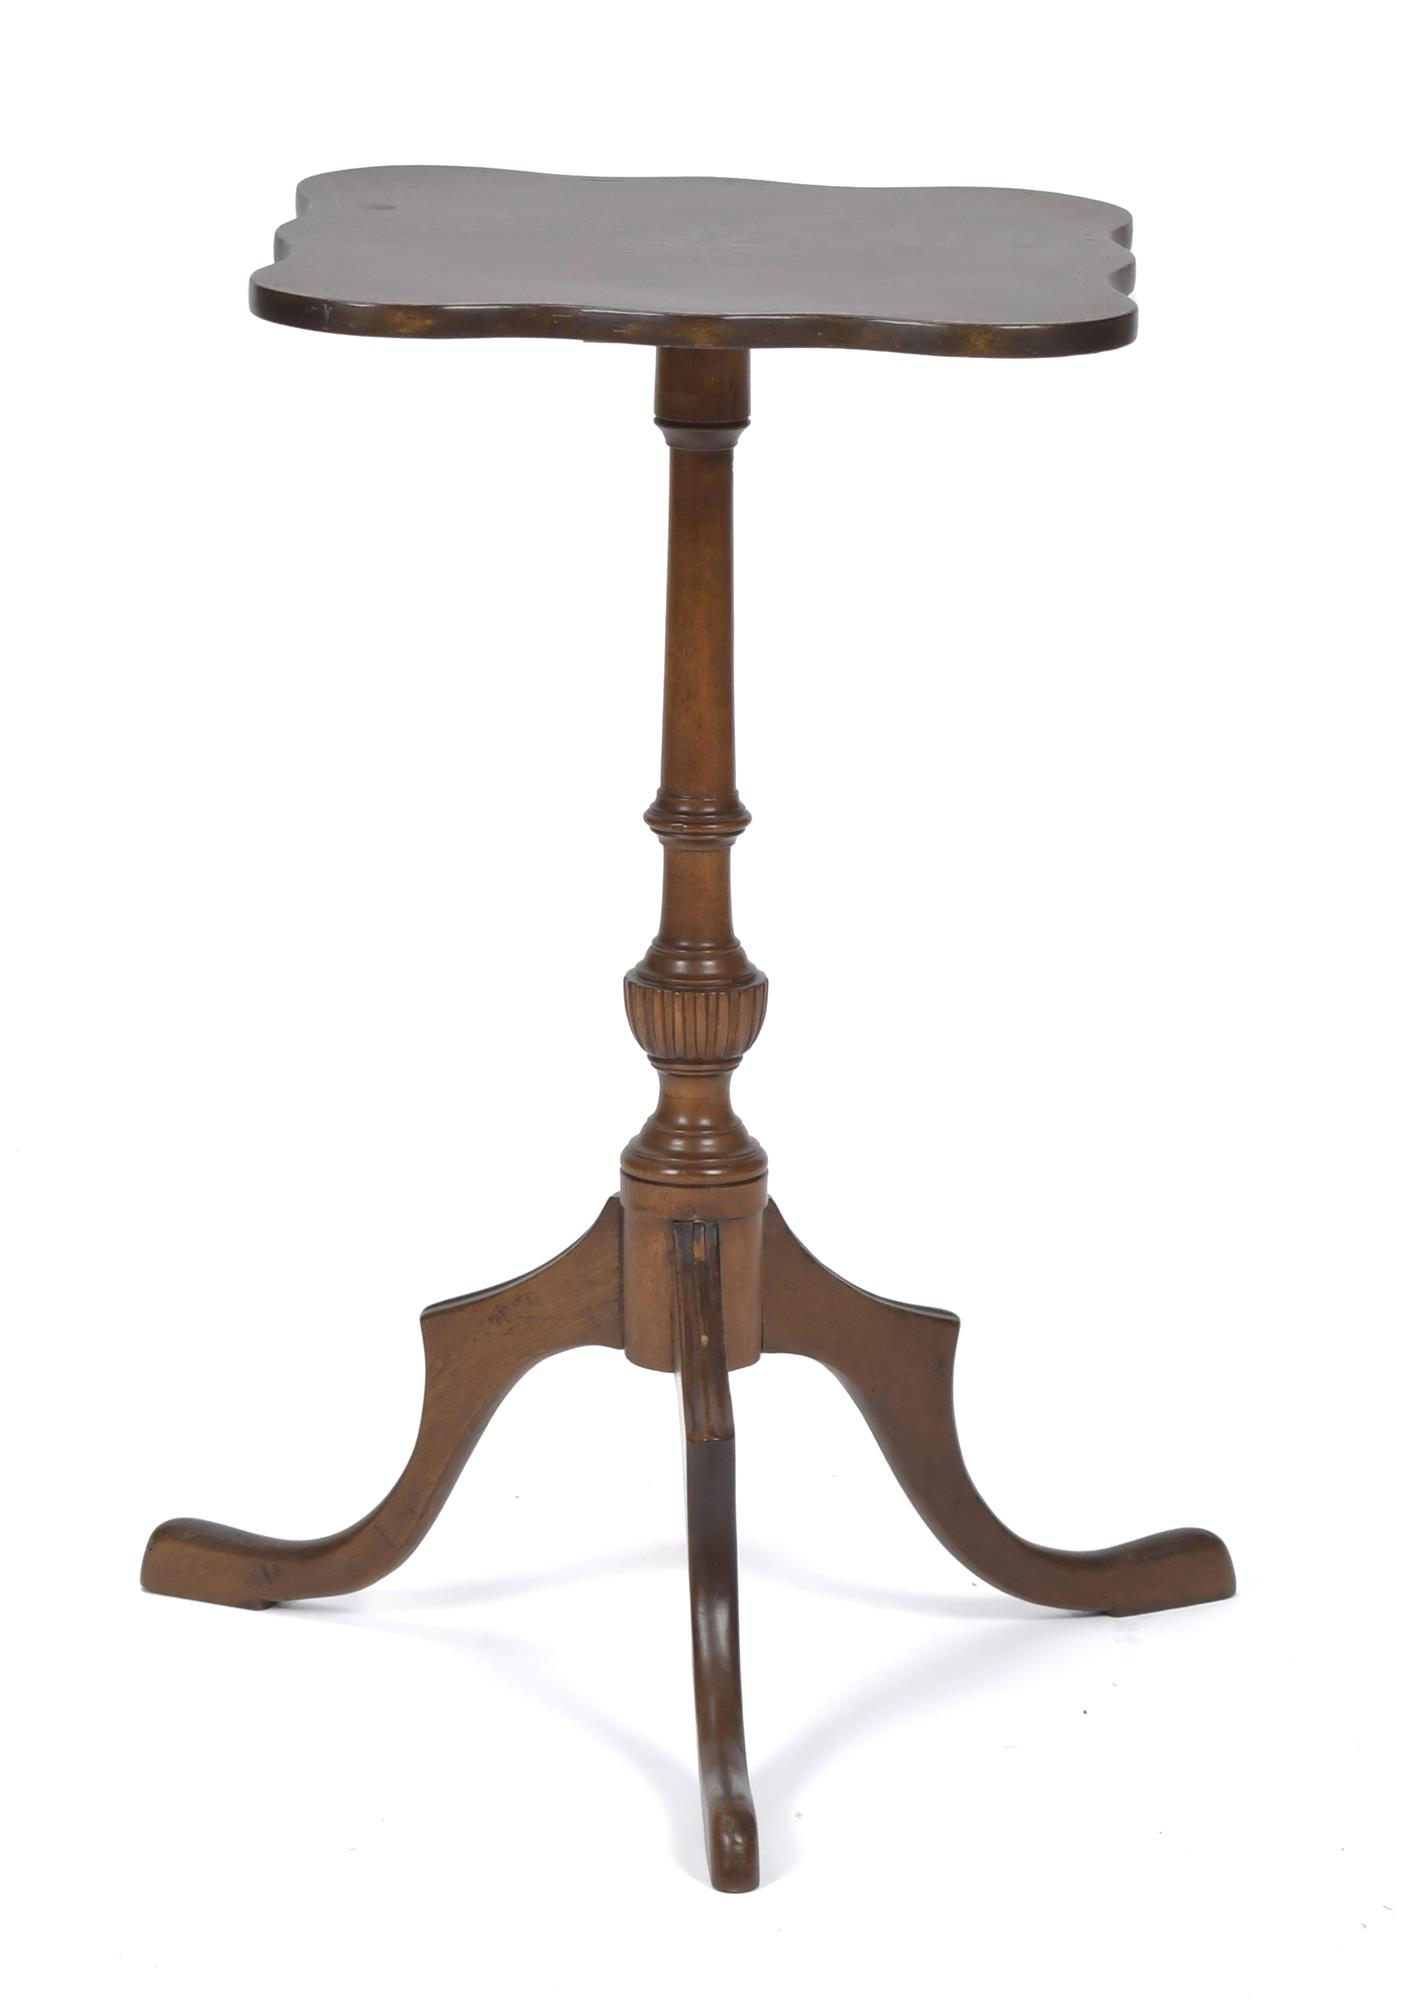 CT CHERRY INLAID CANDLE STAND,